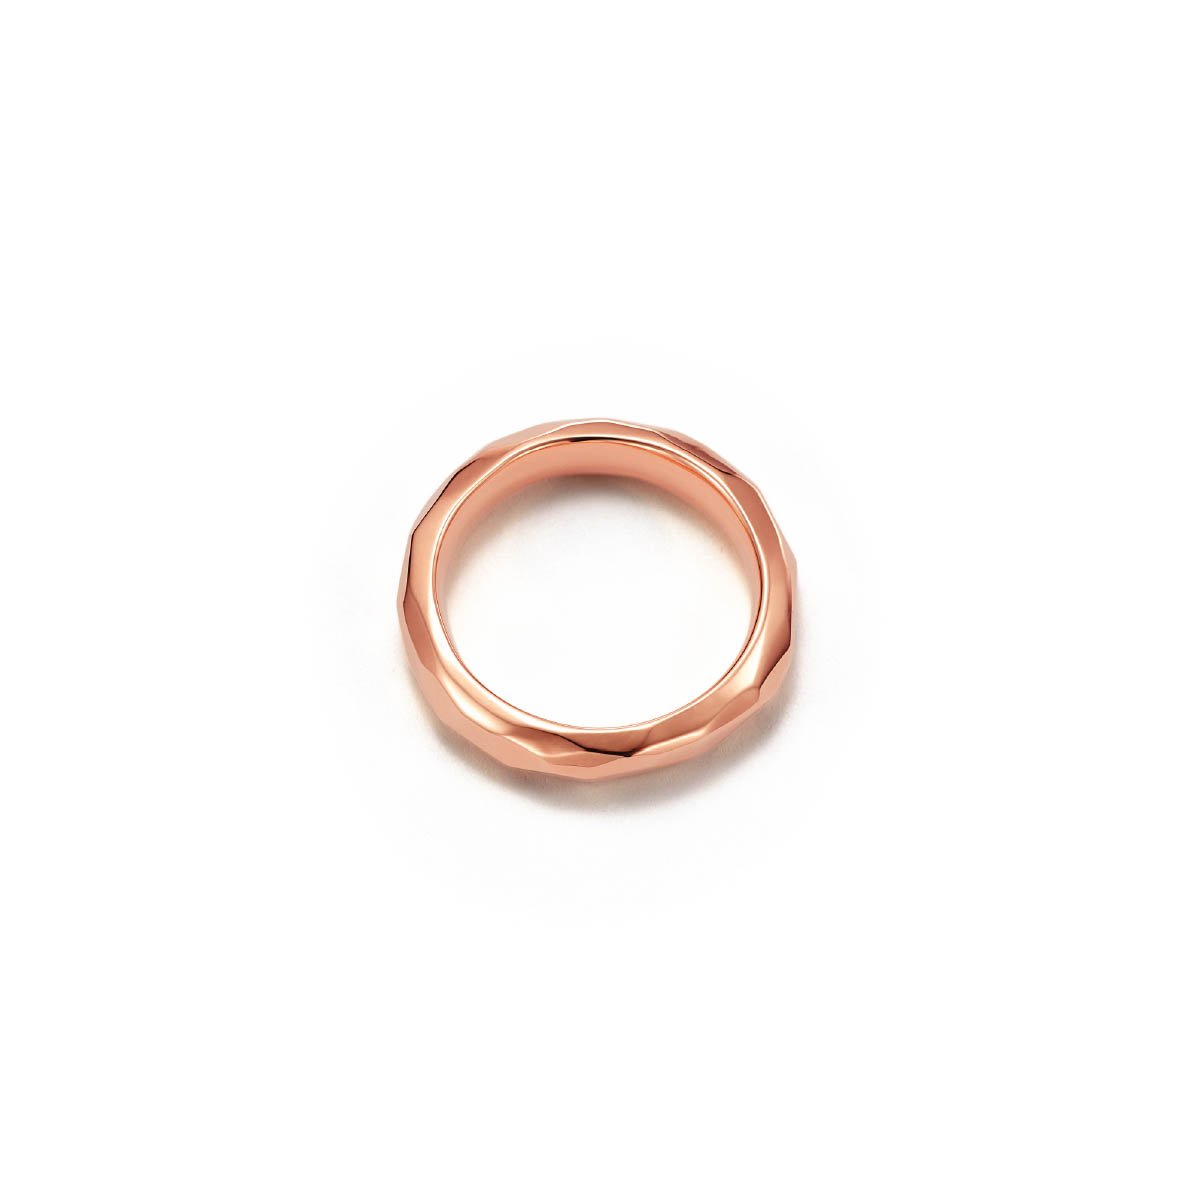 Enchantment Hammered 18kt Certified Fairmined Ecological Rose Gold Wedding Ring/Band - Top View